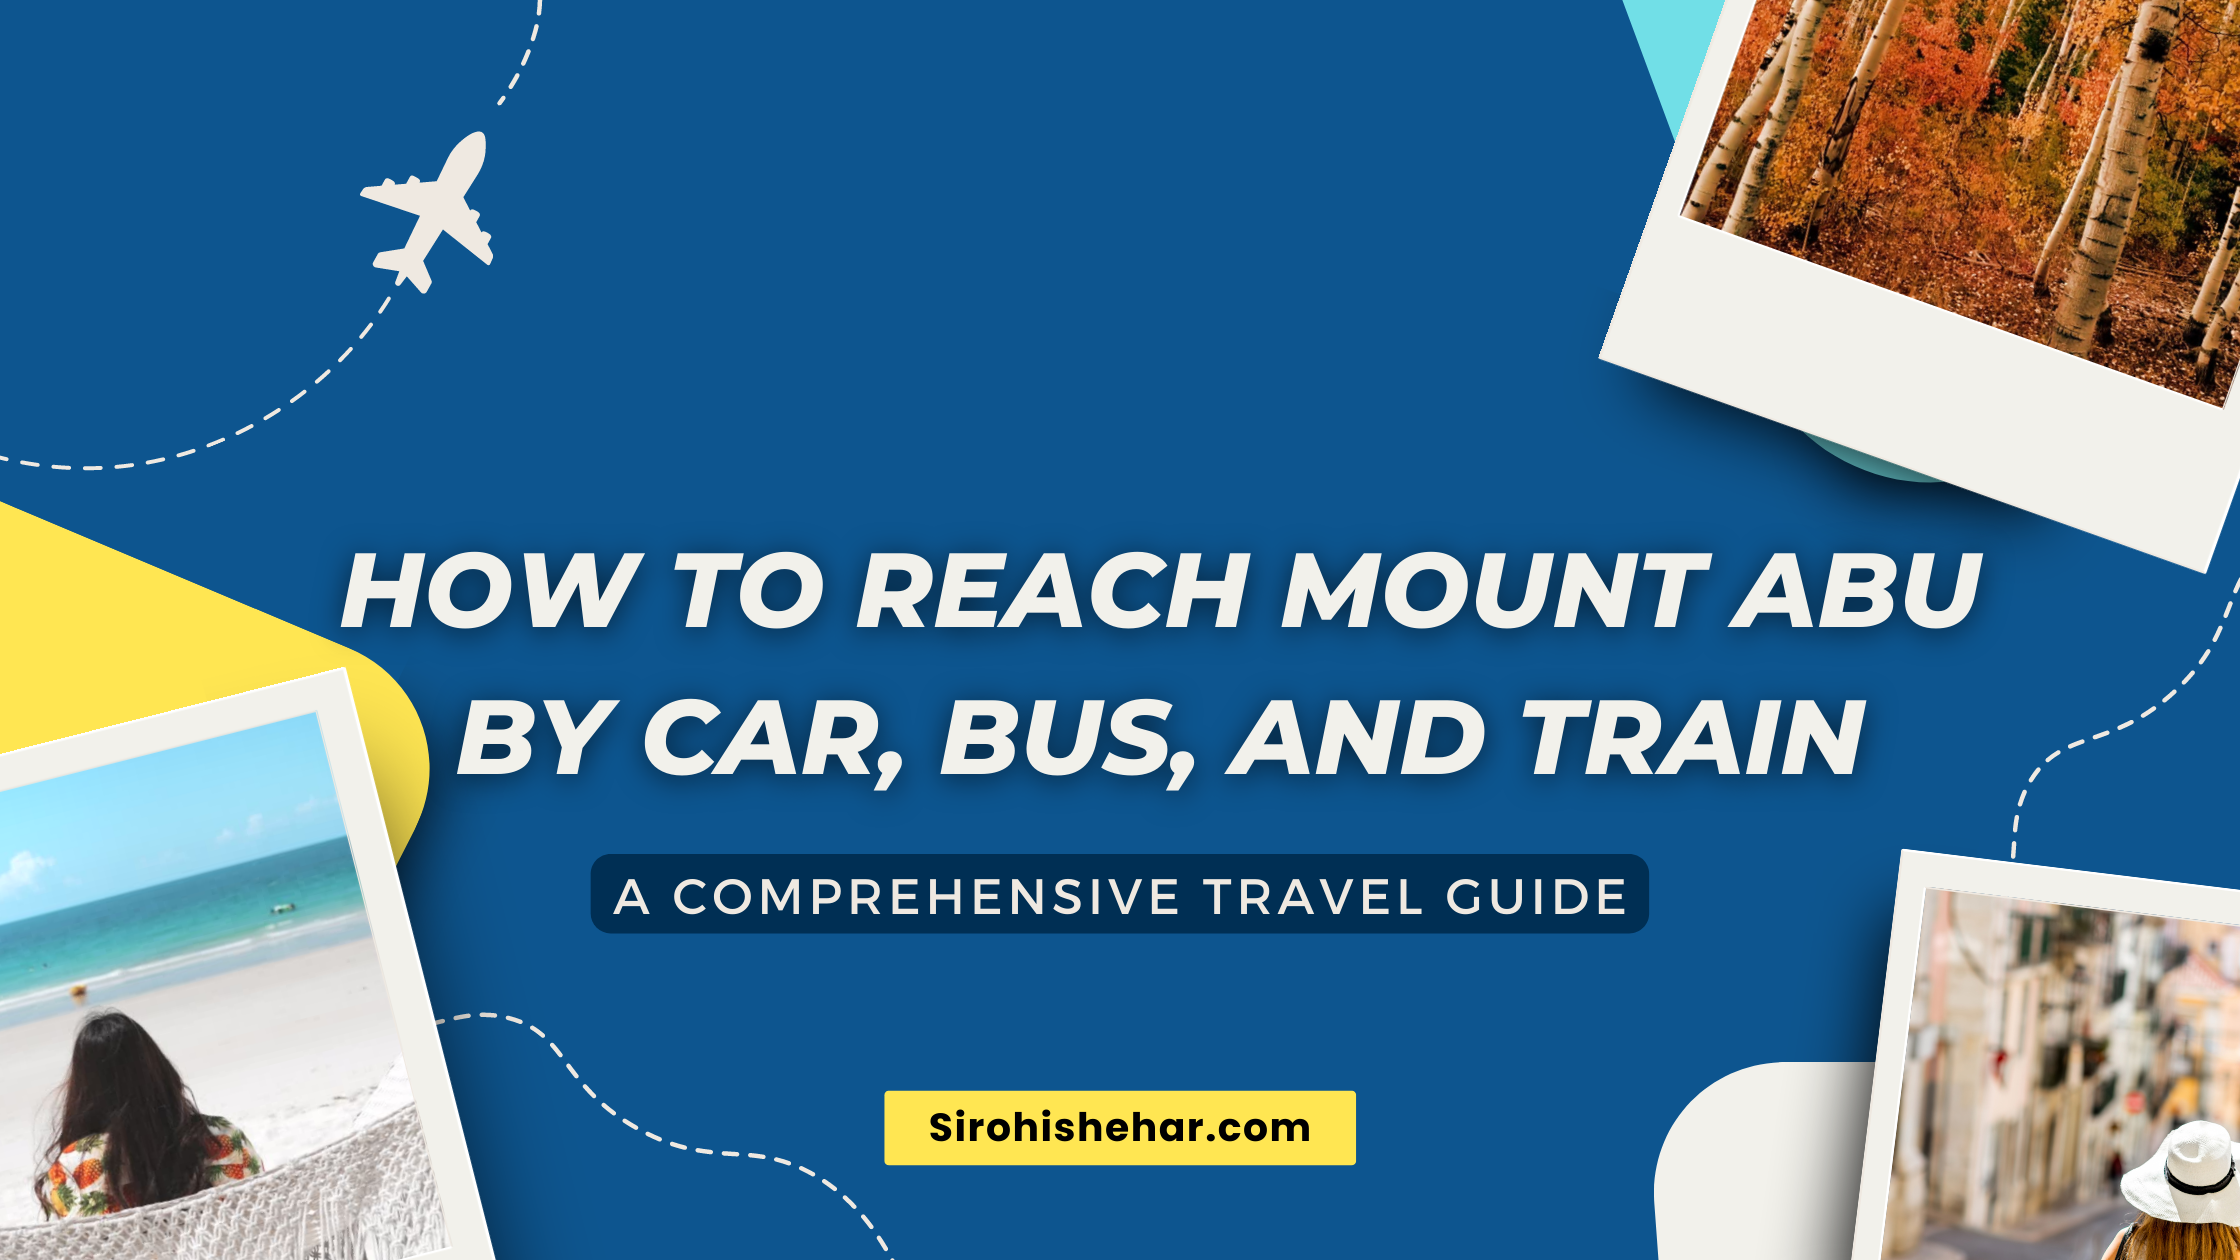 How to Reach Mount Abu by Car, Bus, and Train: A Comprehensive Travel Guide.